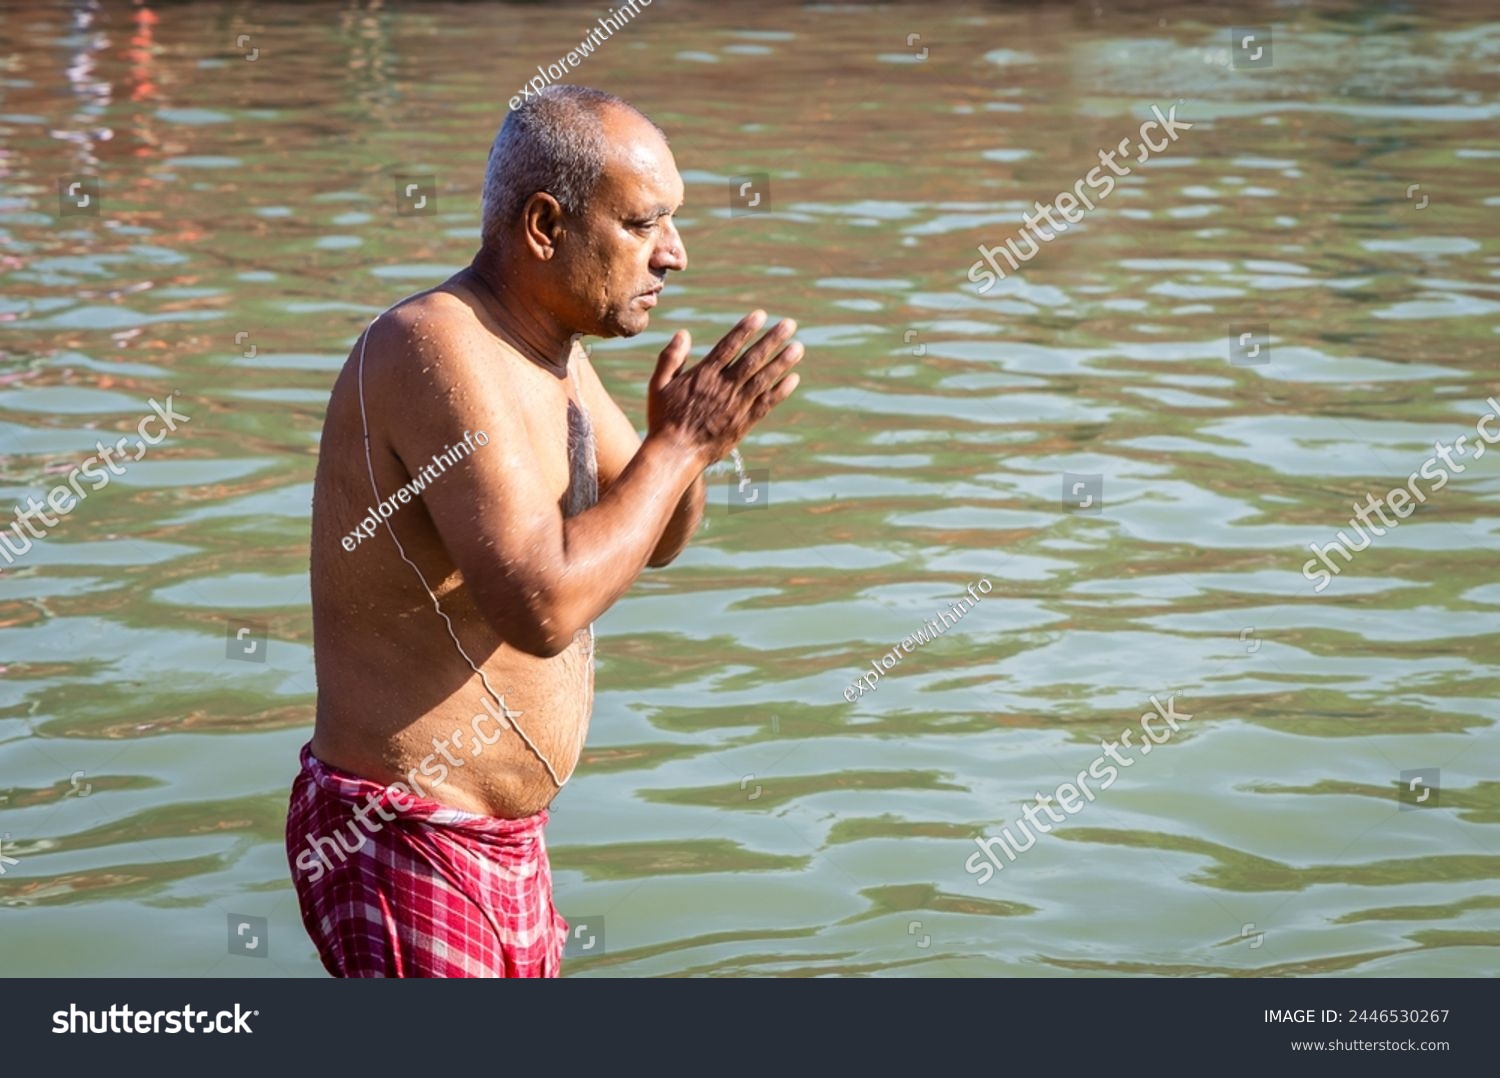 devotee praying after bathing in holy river water at morning from flat angle #2446530267